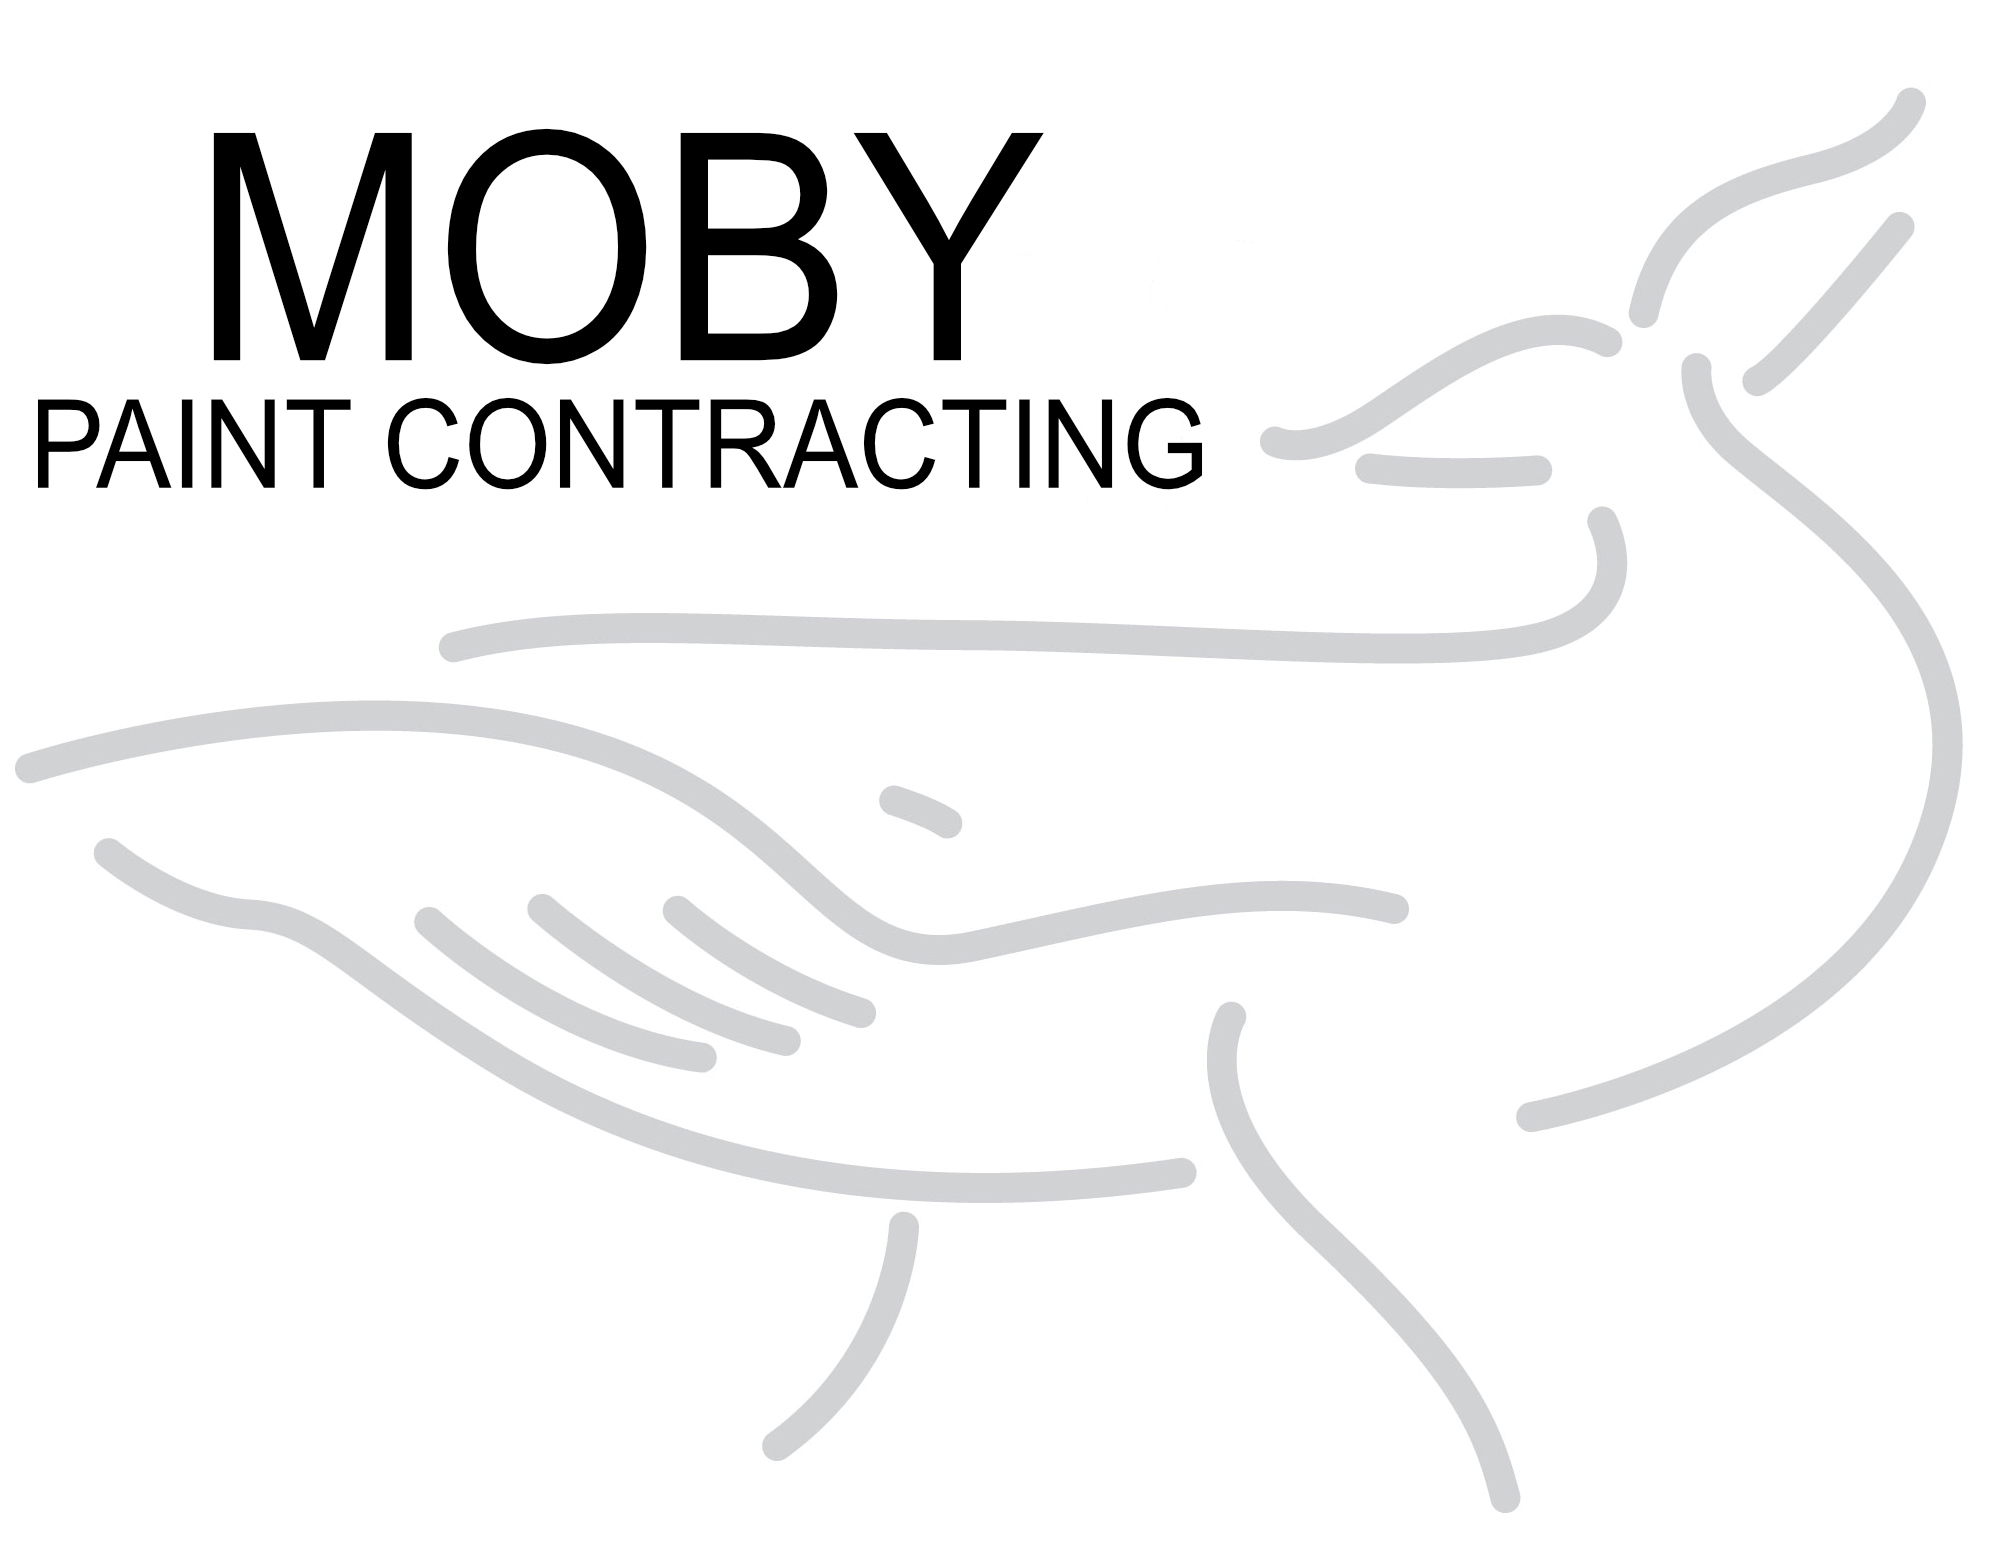 Moby Paint Contracting